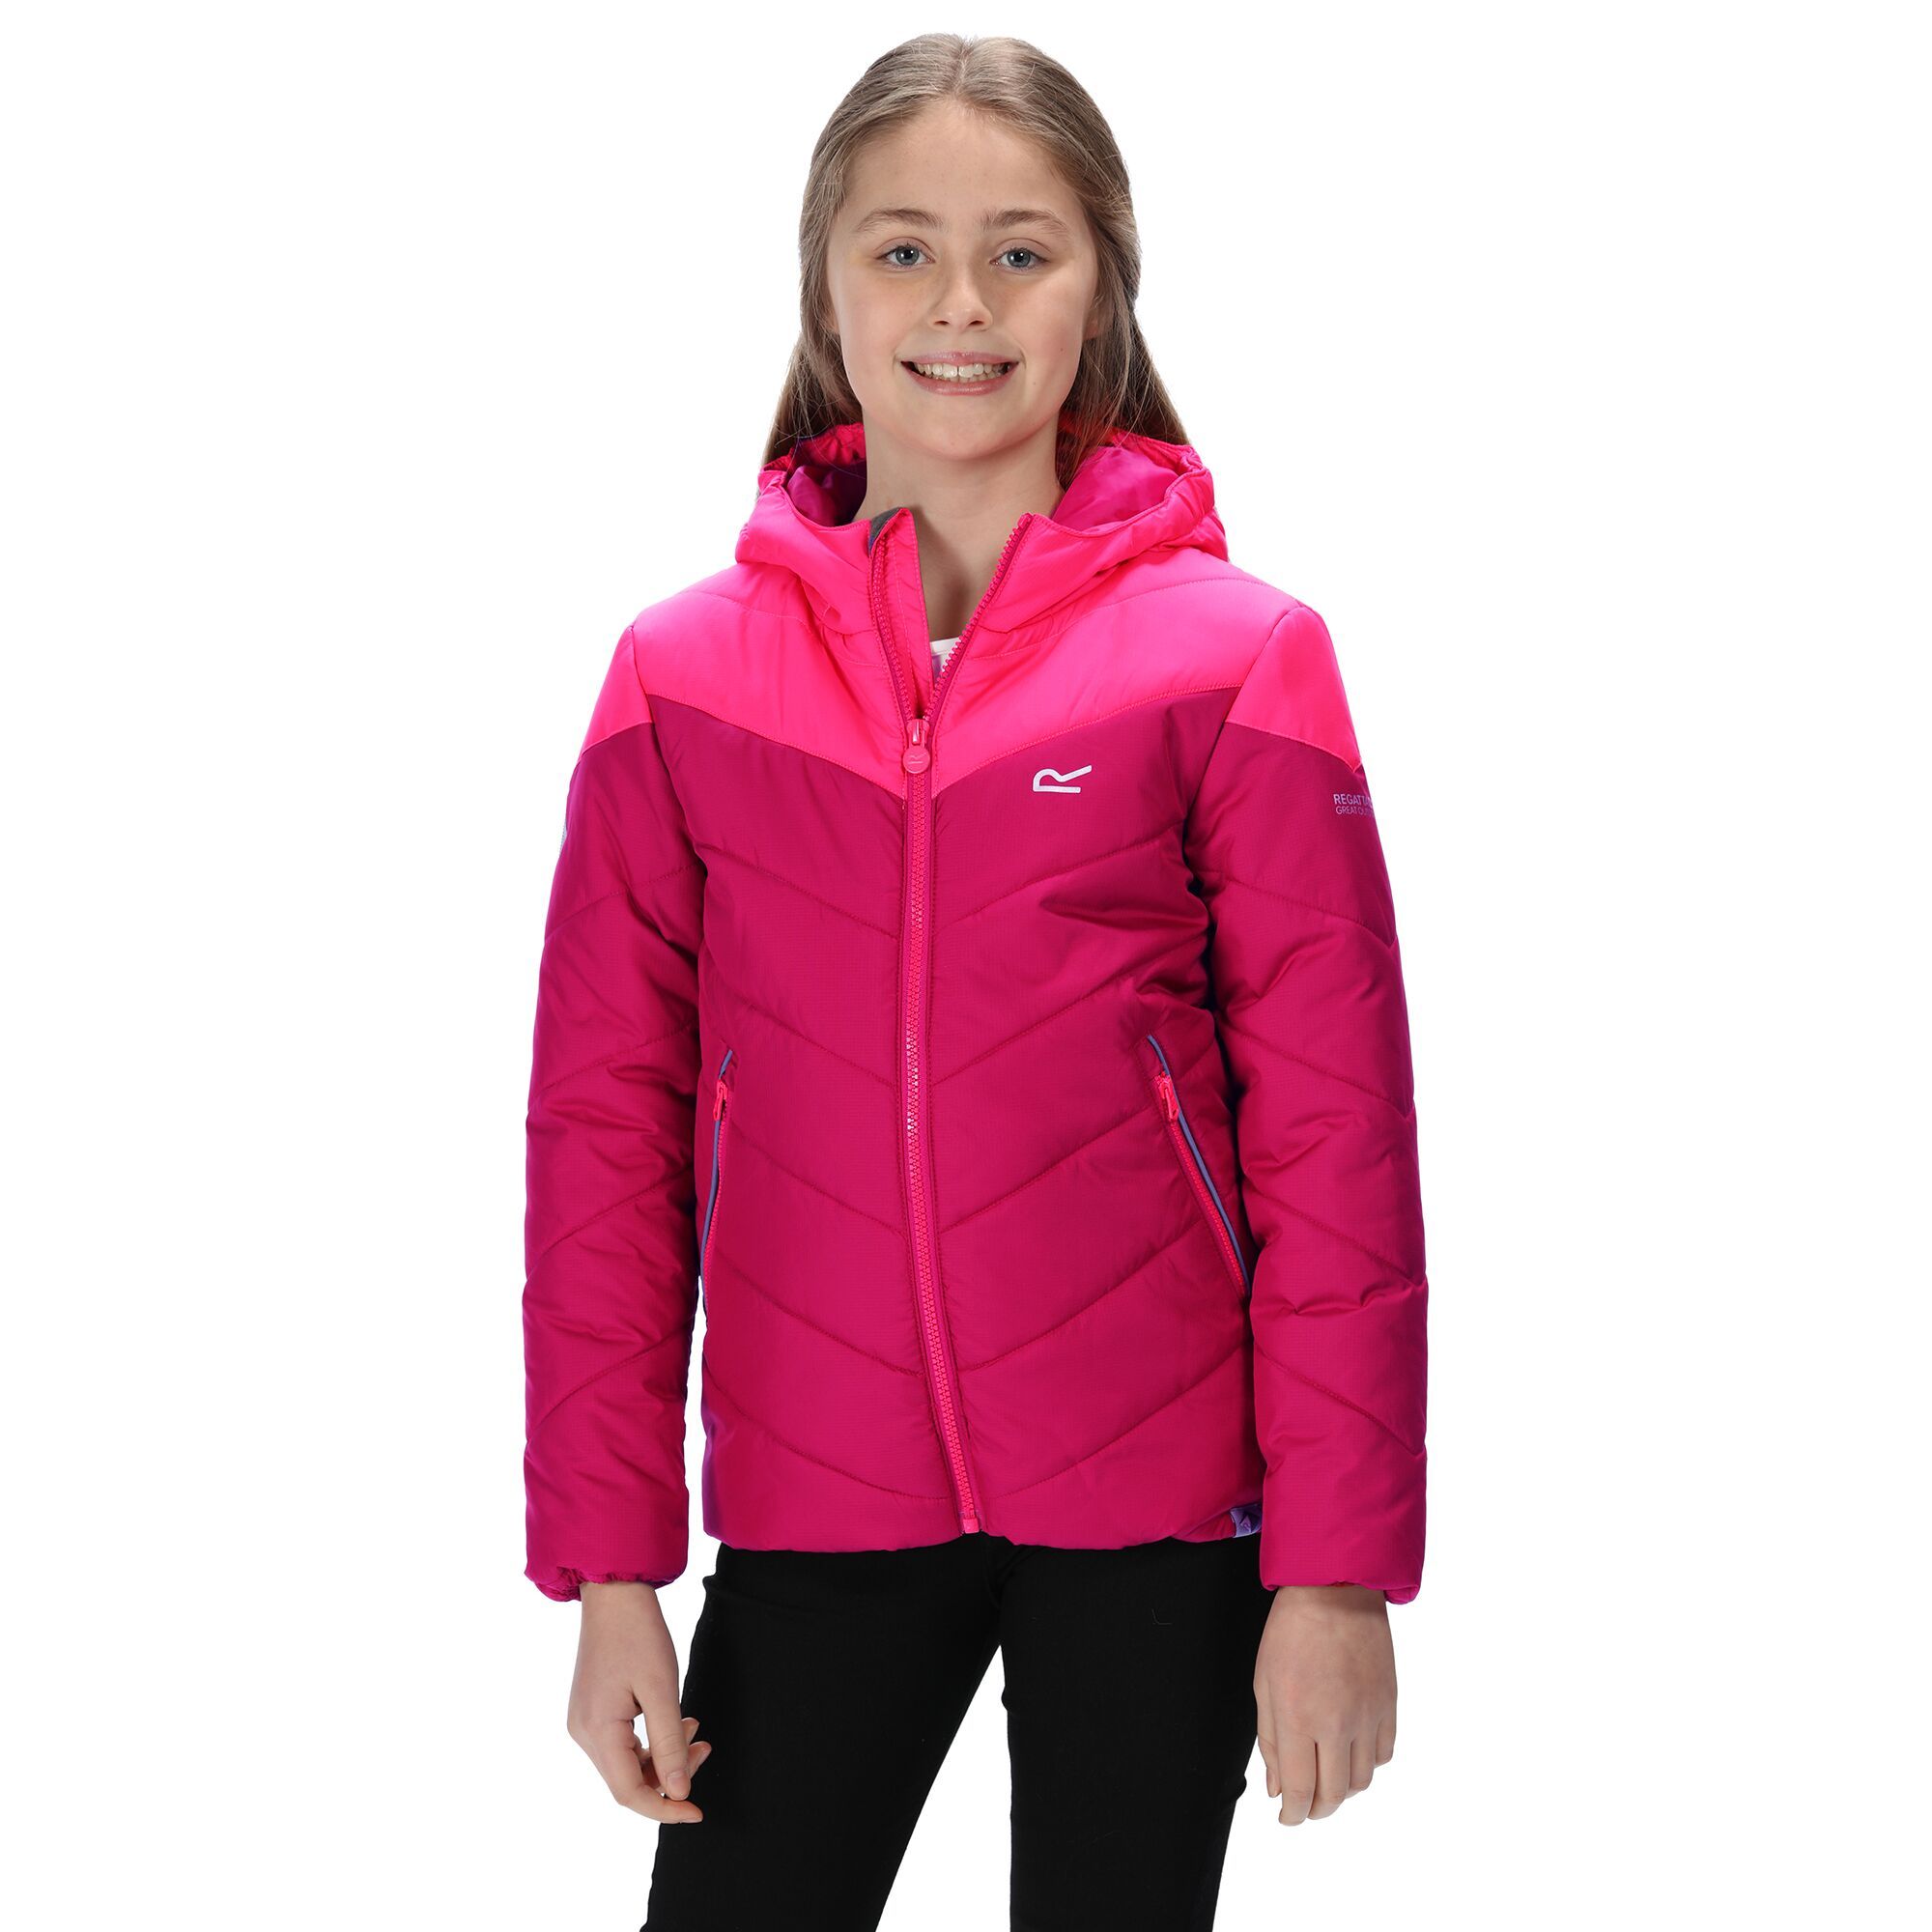 Material: 100% 75d polyester fabric. Durable water repellent finish. Thermo-Guard insulation. Heavyweight fill. Grown on hood. 2 zipped lower pockets. Elasticated cuffs and hem. Reflective trim. Signature R on the chest. Size (height/chest): (2 Years) 92cm/53-55cm, (3-4 Years) 98-104cm/55-57cm, (5-6 Years) 110-116cm/59-61cm, (7-8 Years) 122-128cm/63-67cm, (9-10 Years) 135-140cm/69-73cm, (11-12 Years) 146-152cm/75-79cm, (13 Years) 153-158cm/82cm, (14 Years) 164-170cm/86cm, (15-16 Years) 170-176cm/89-92cm.